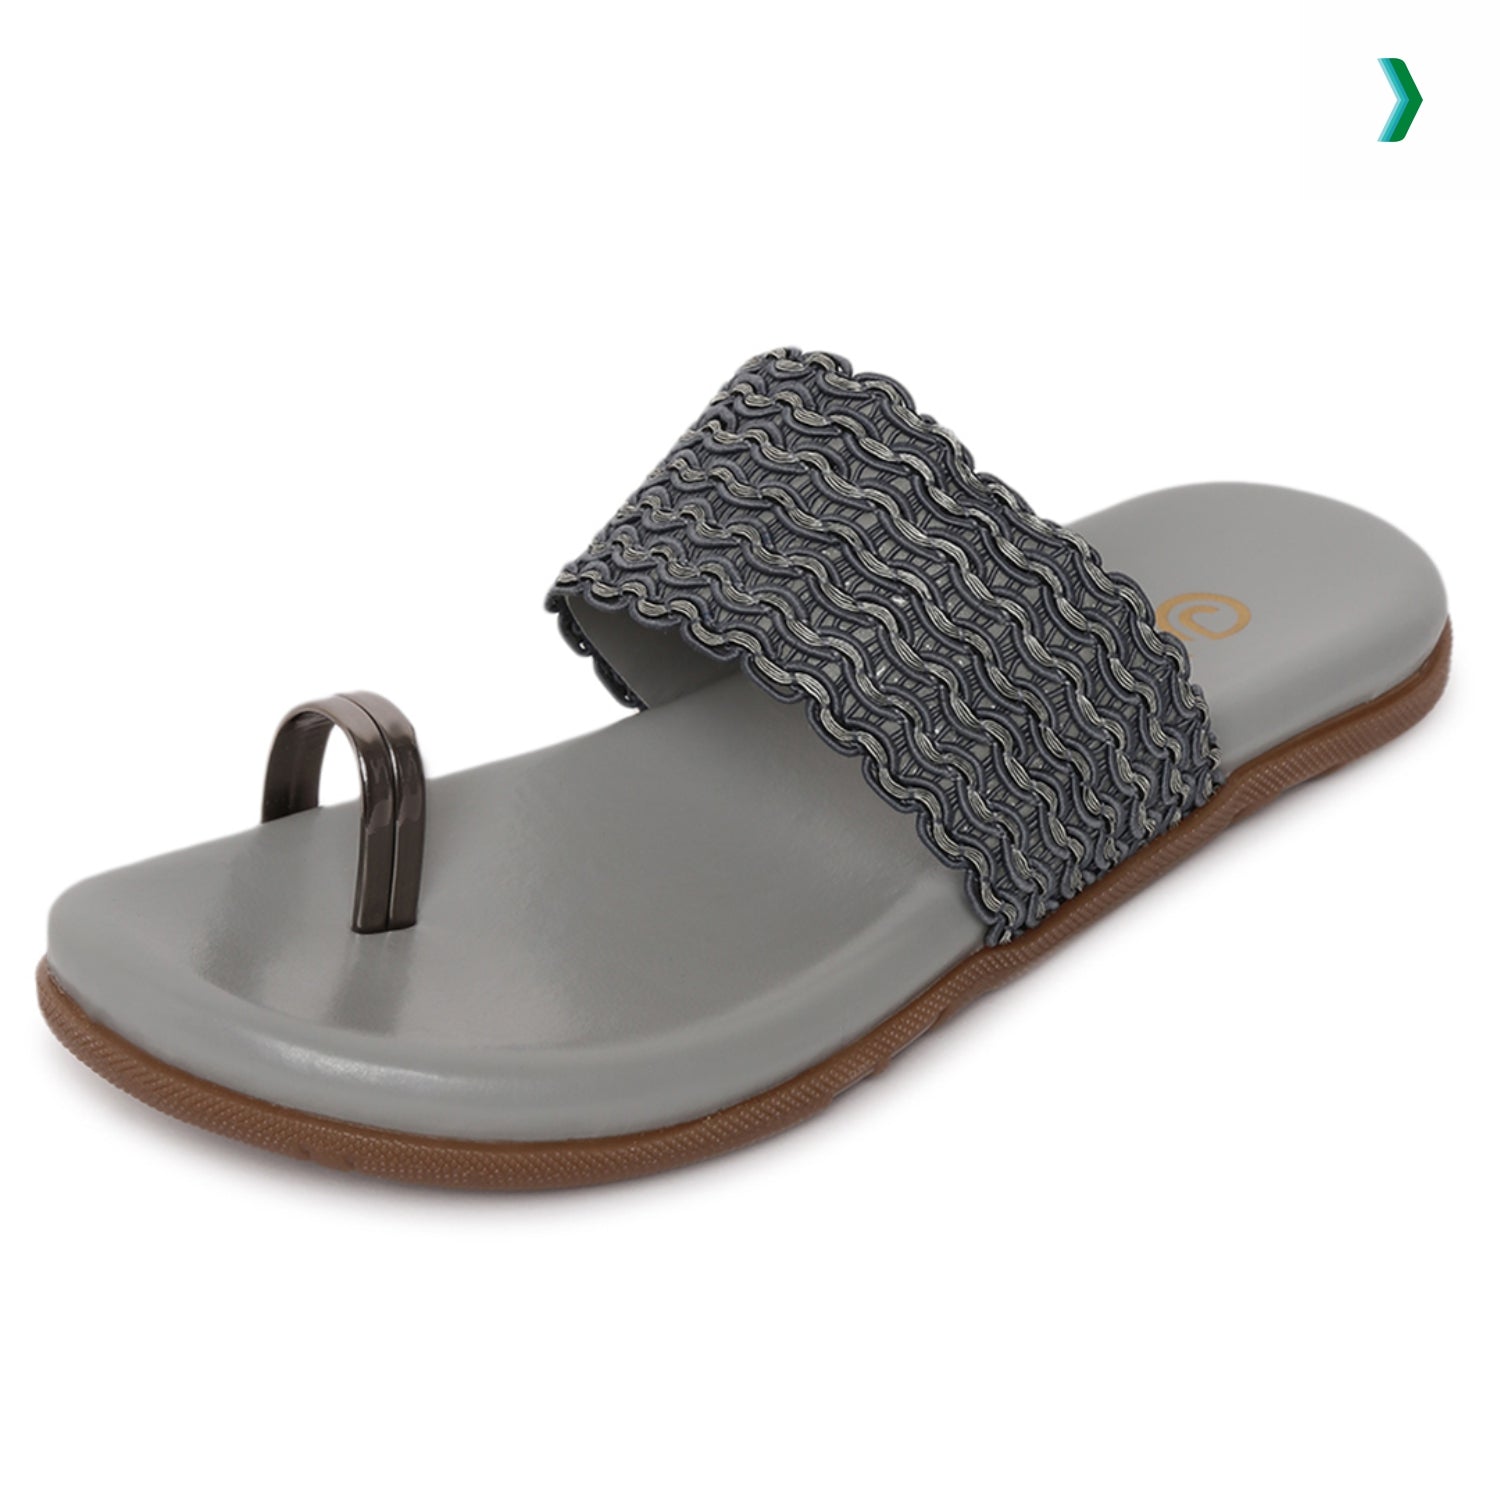 soft chappal for ladies, doctor slippers, ladies flat sandals, doctor extra soft slippers, doctor slippers for ladies, extra soft chappals for ladies, soft chappal , soft chappal for ladies , extra soft slippers for ladies, doctor slippers ladies, fancy chappal, ladies fancy chappal